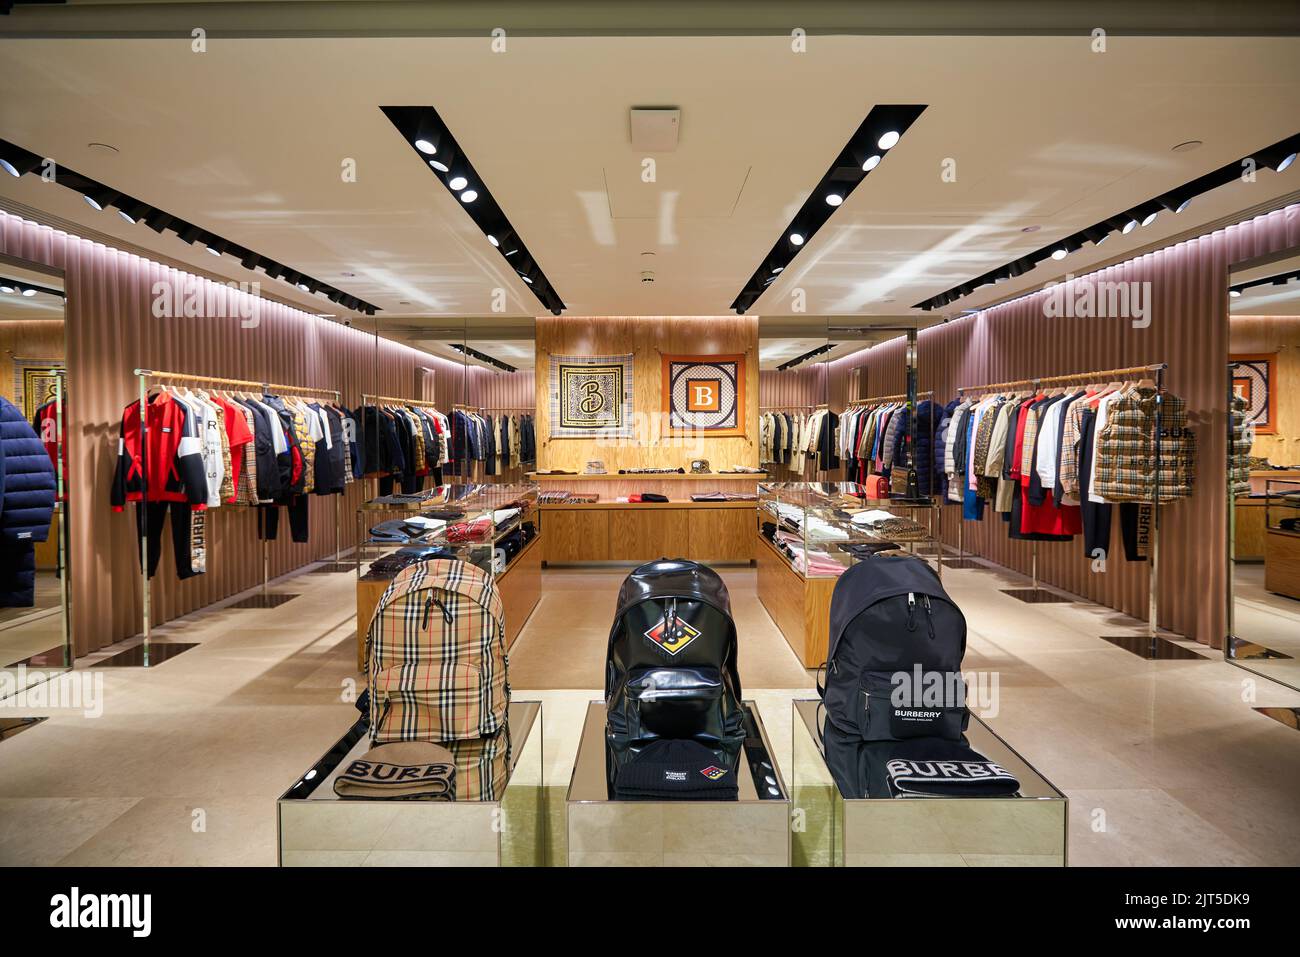 SINGAPORE - CIRCA JANUARY, 2020: interior shot of Burberry store in Singapore Changi Airport. Burberry Group PLC is a British luxury fashion house hea Stock Photo